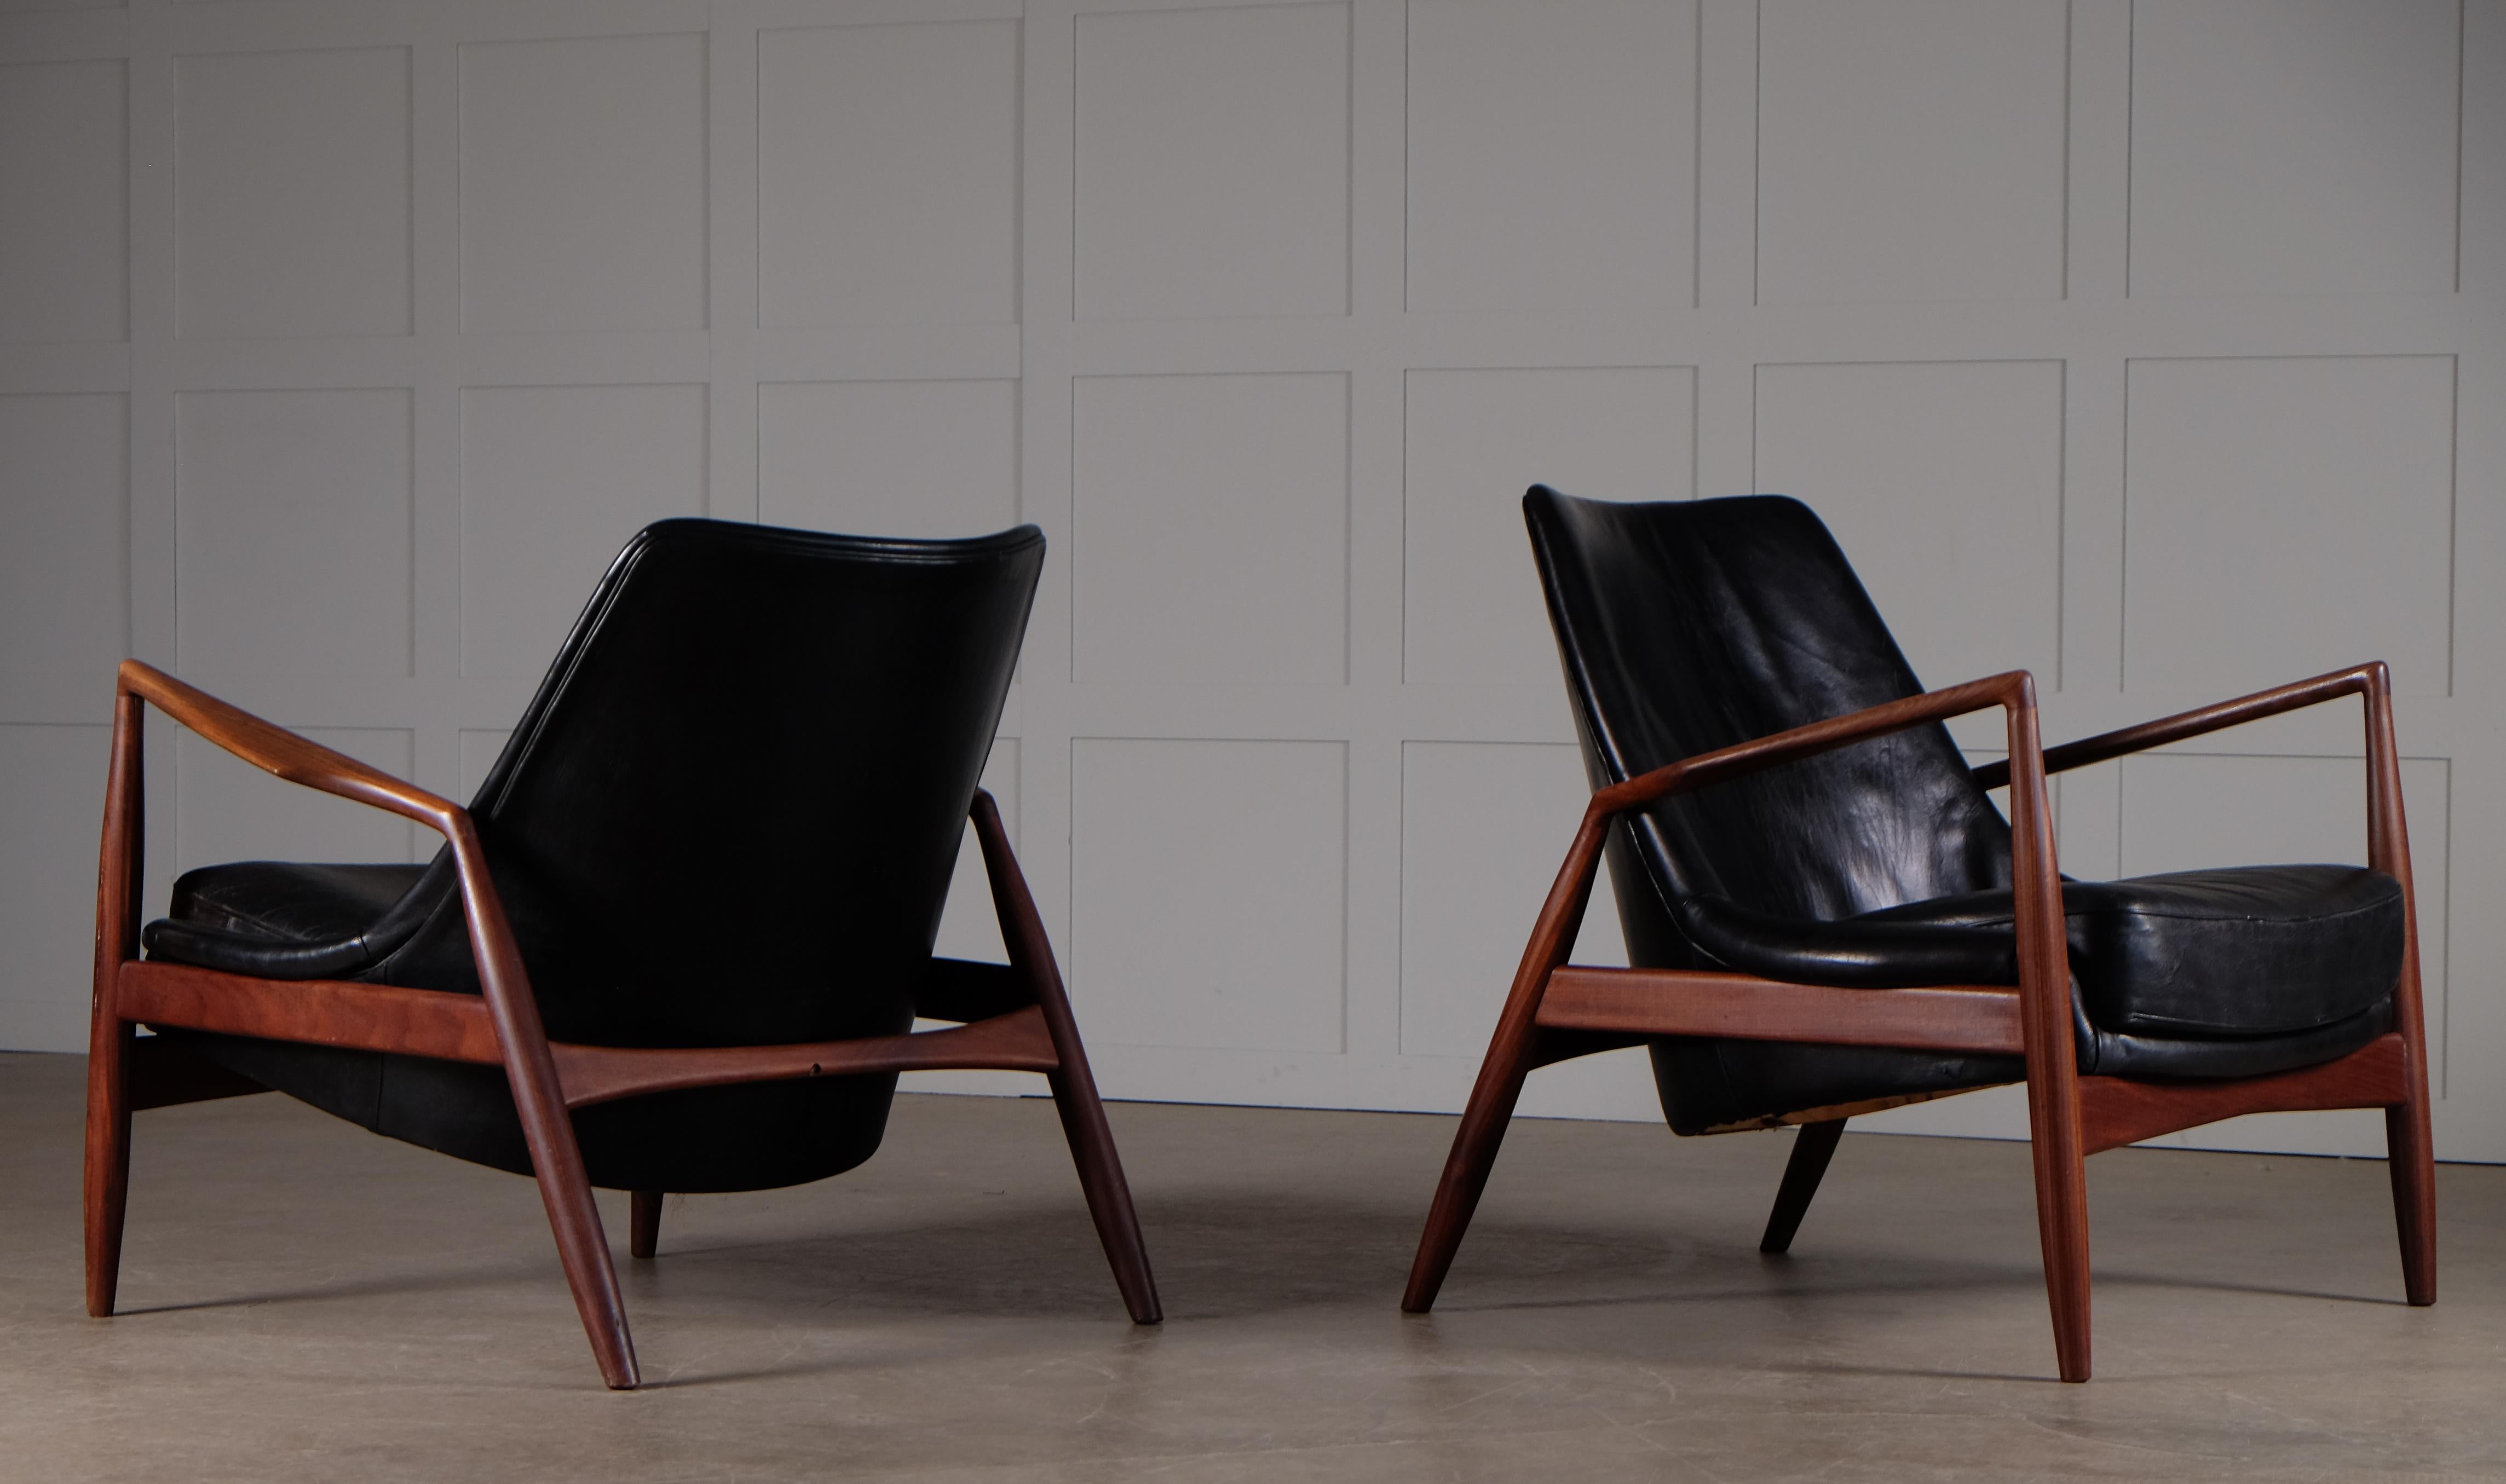 Rare Pair of Ib Kofod-Larsen 'Seal' Easy Chairs, 1960s For Sale 5